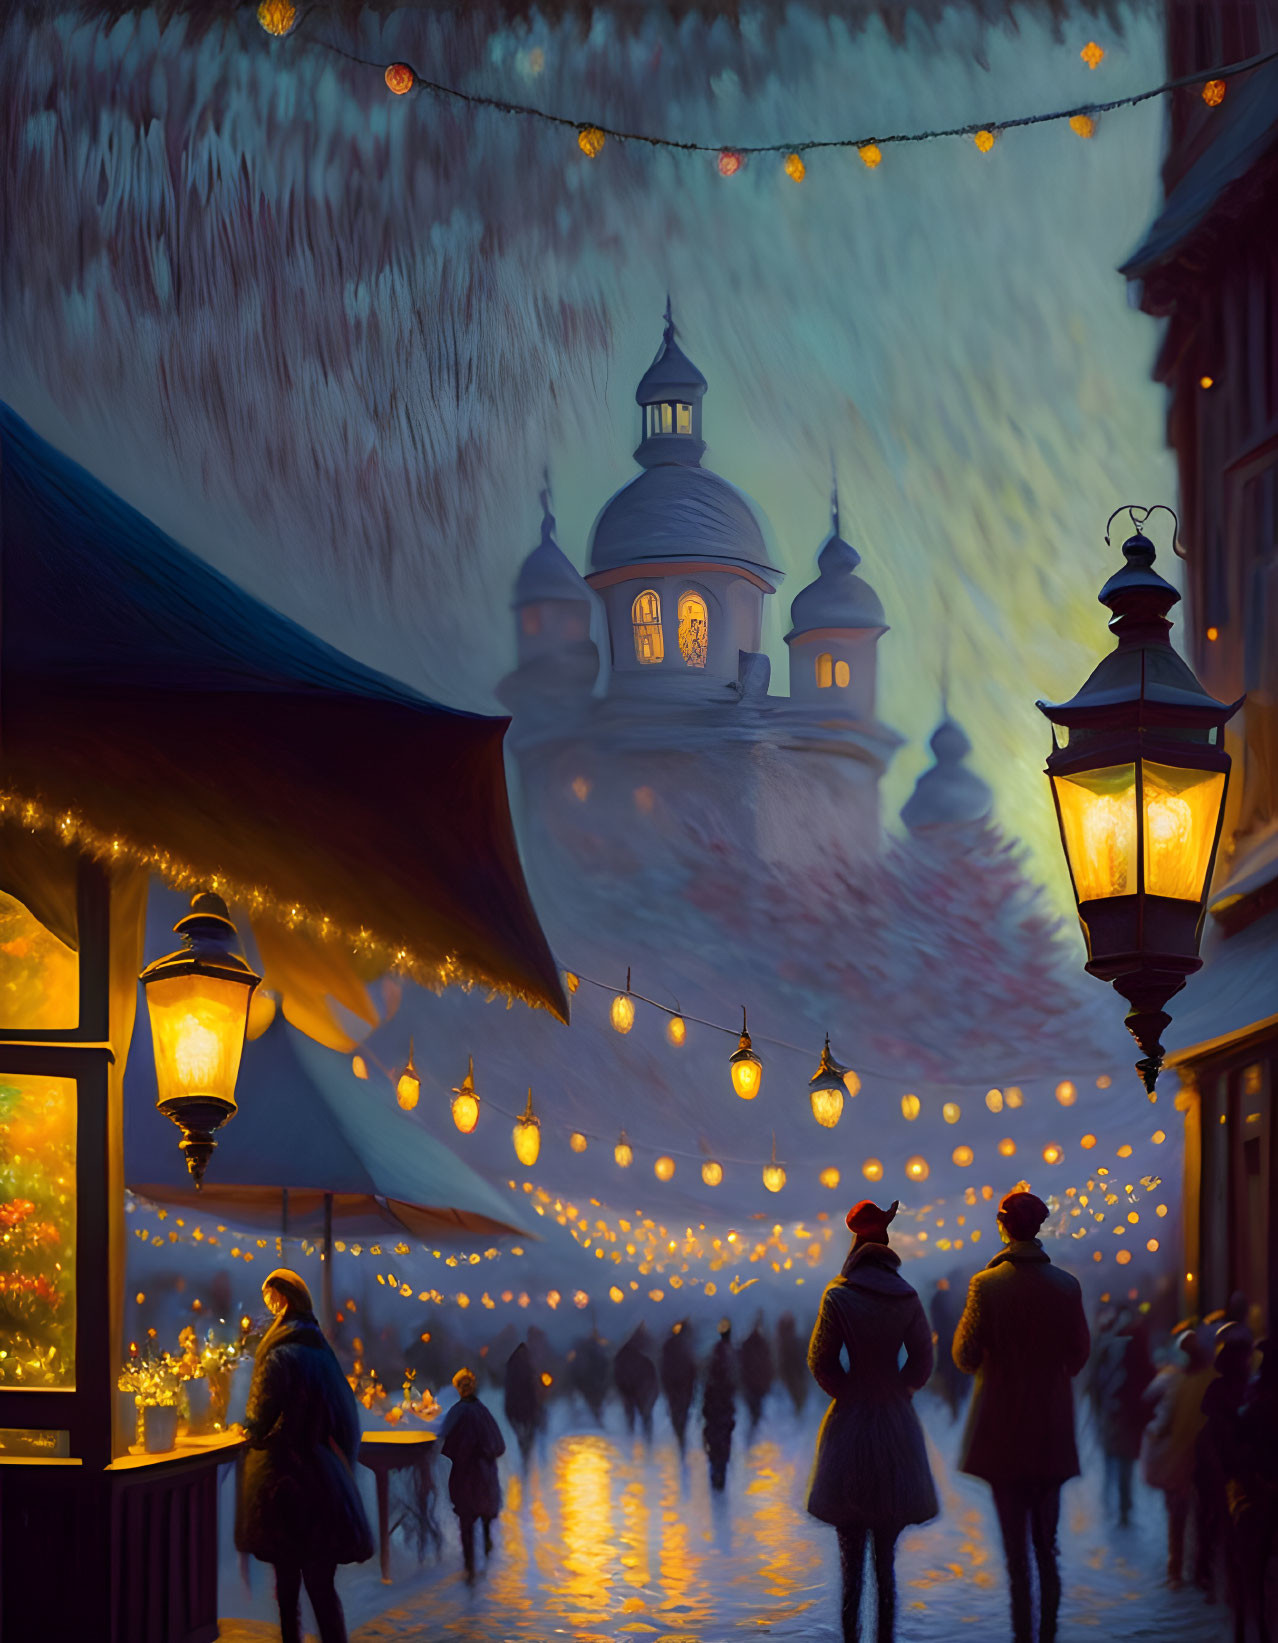 Twilight night market with glowing lanterns and historical buildings